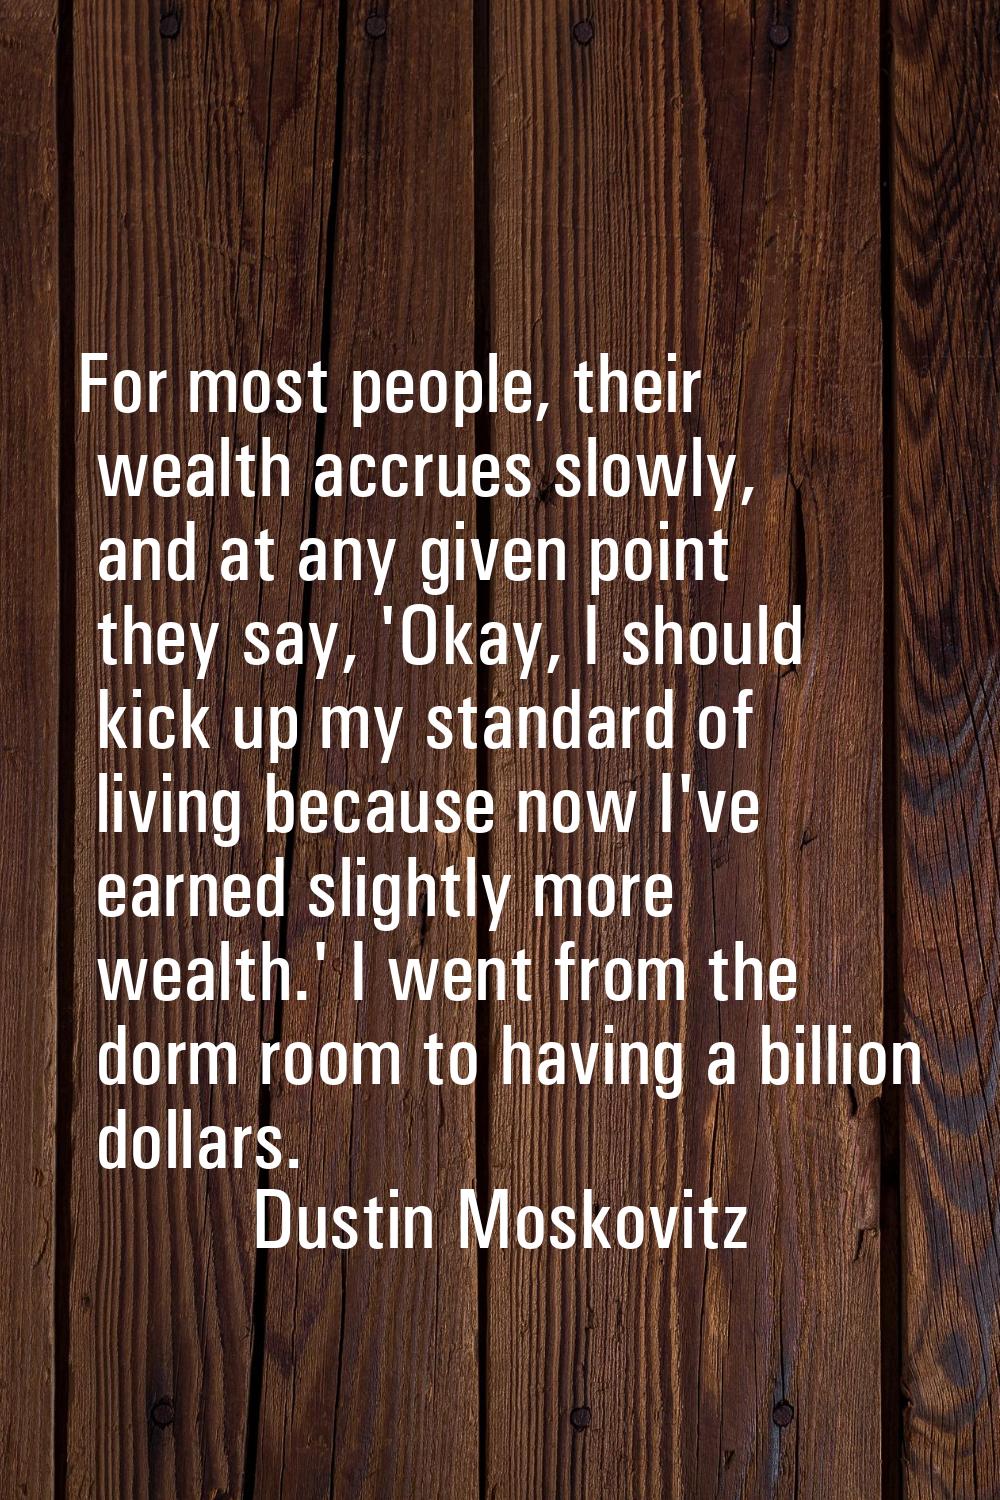 For most people, their wealth accrues slowly, and at any given point they say, 'Okay, I should kick